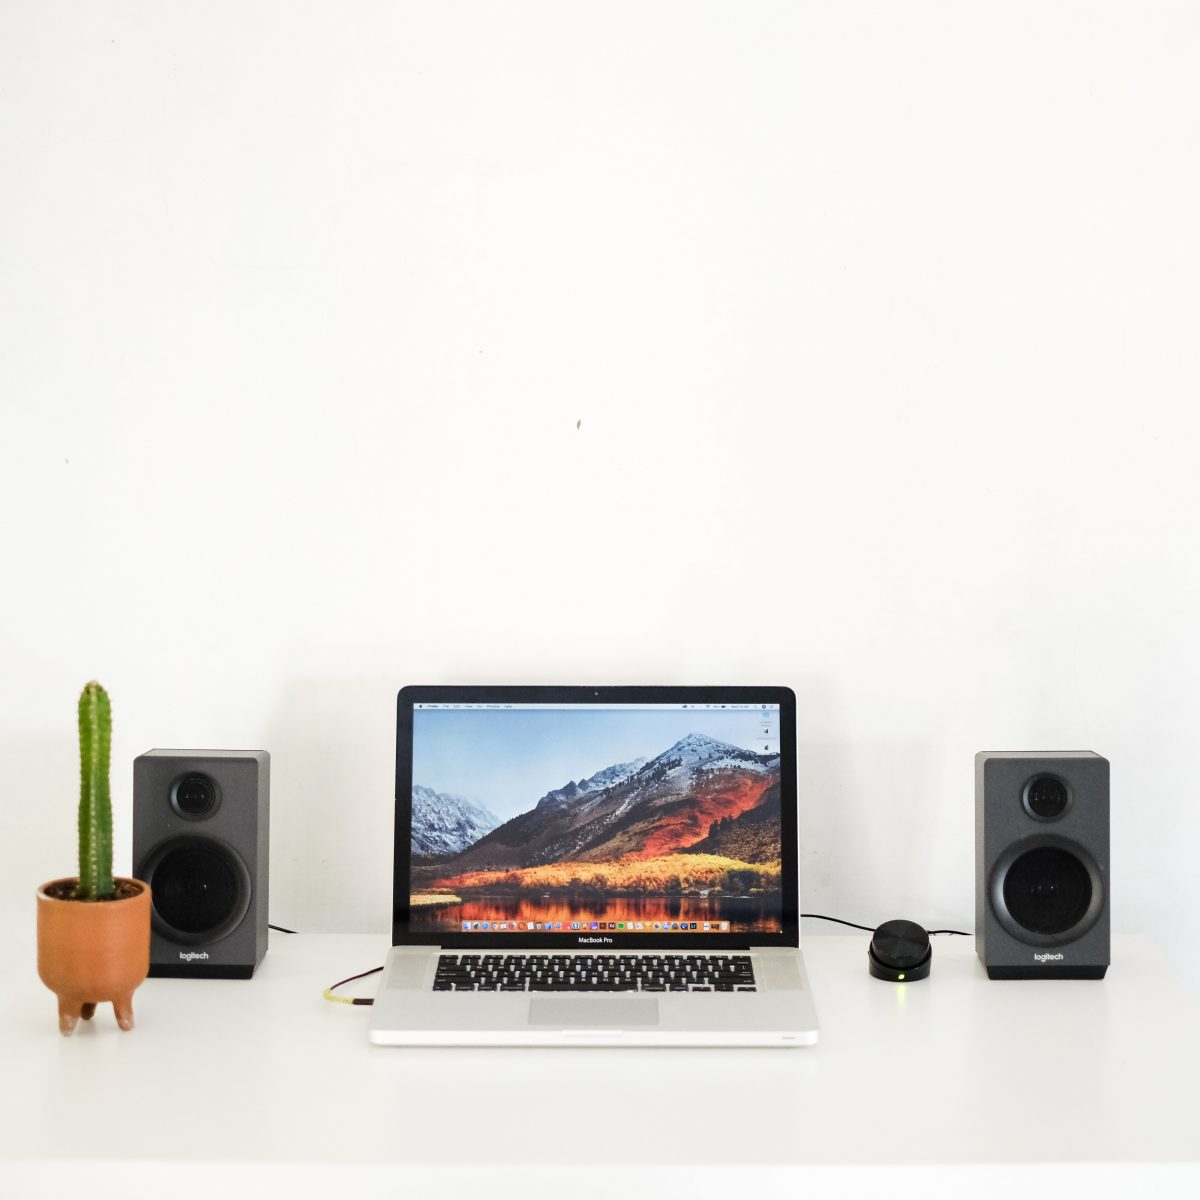 10 Best Computer Speakers Under 50 Dollars: A Buying Guide